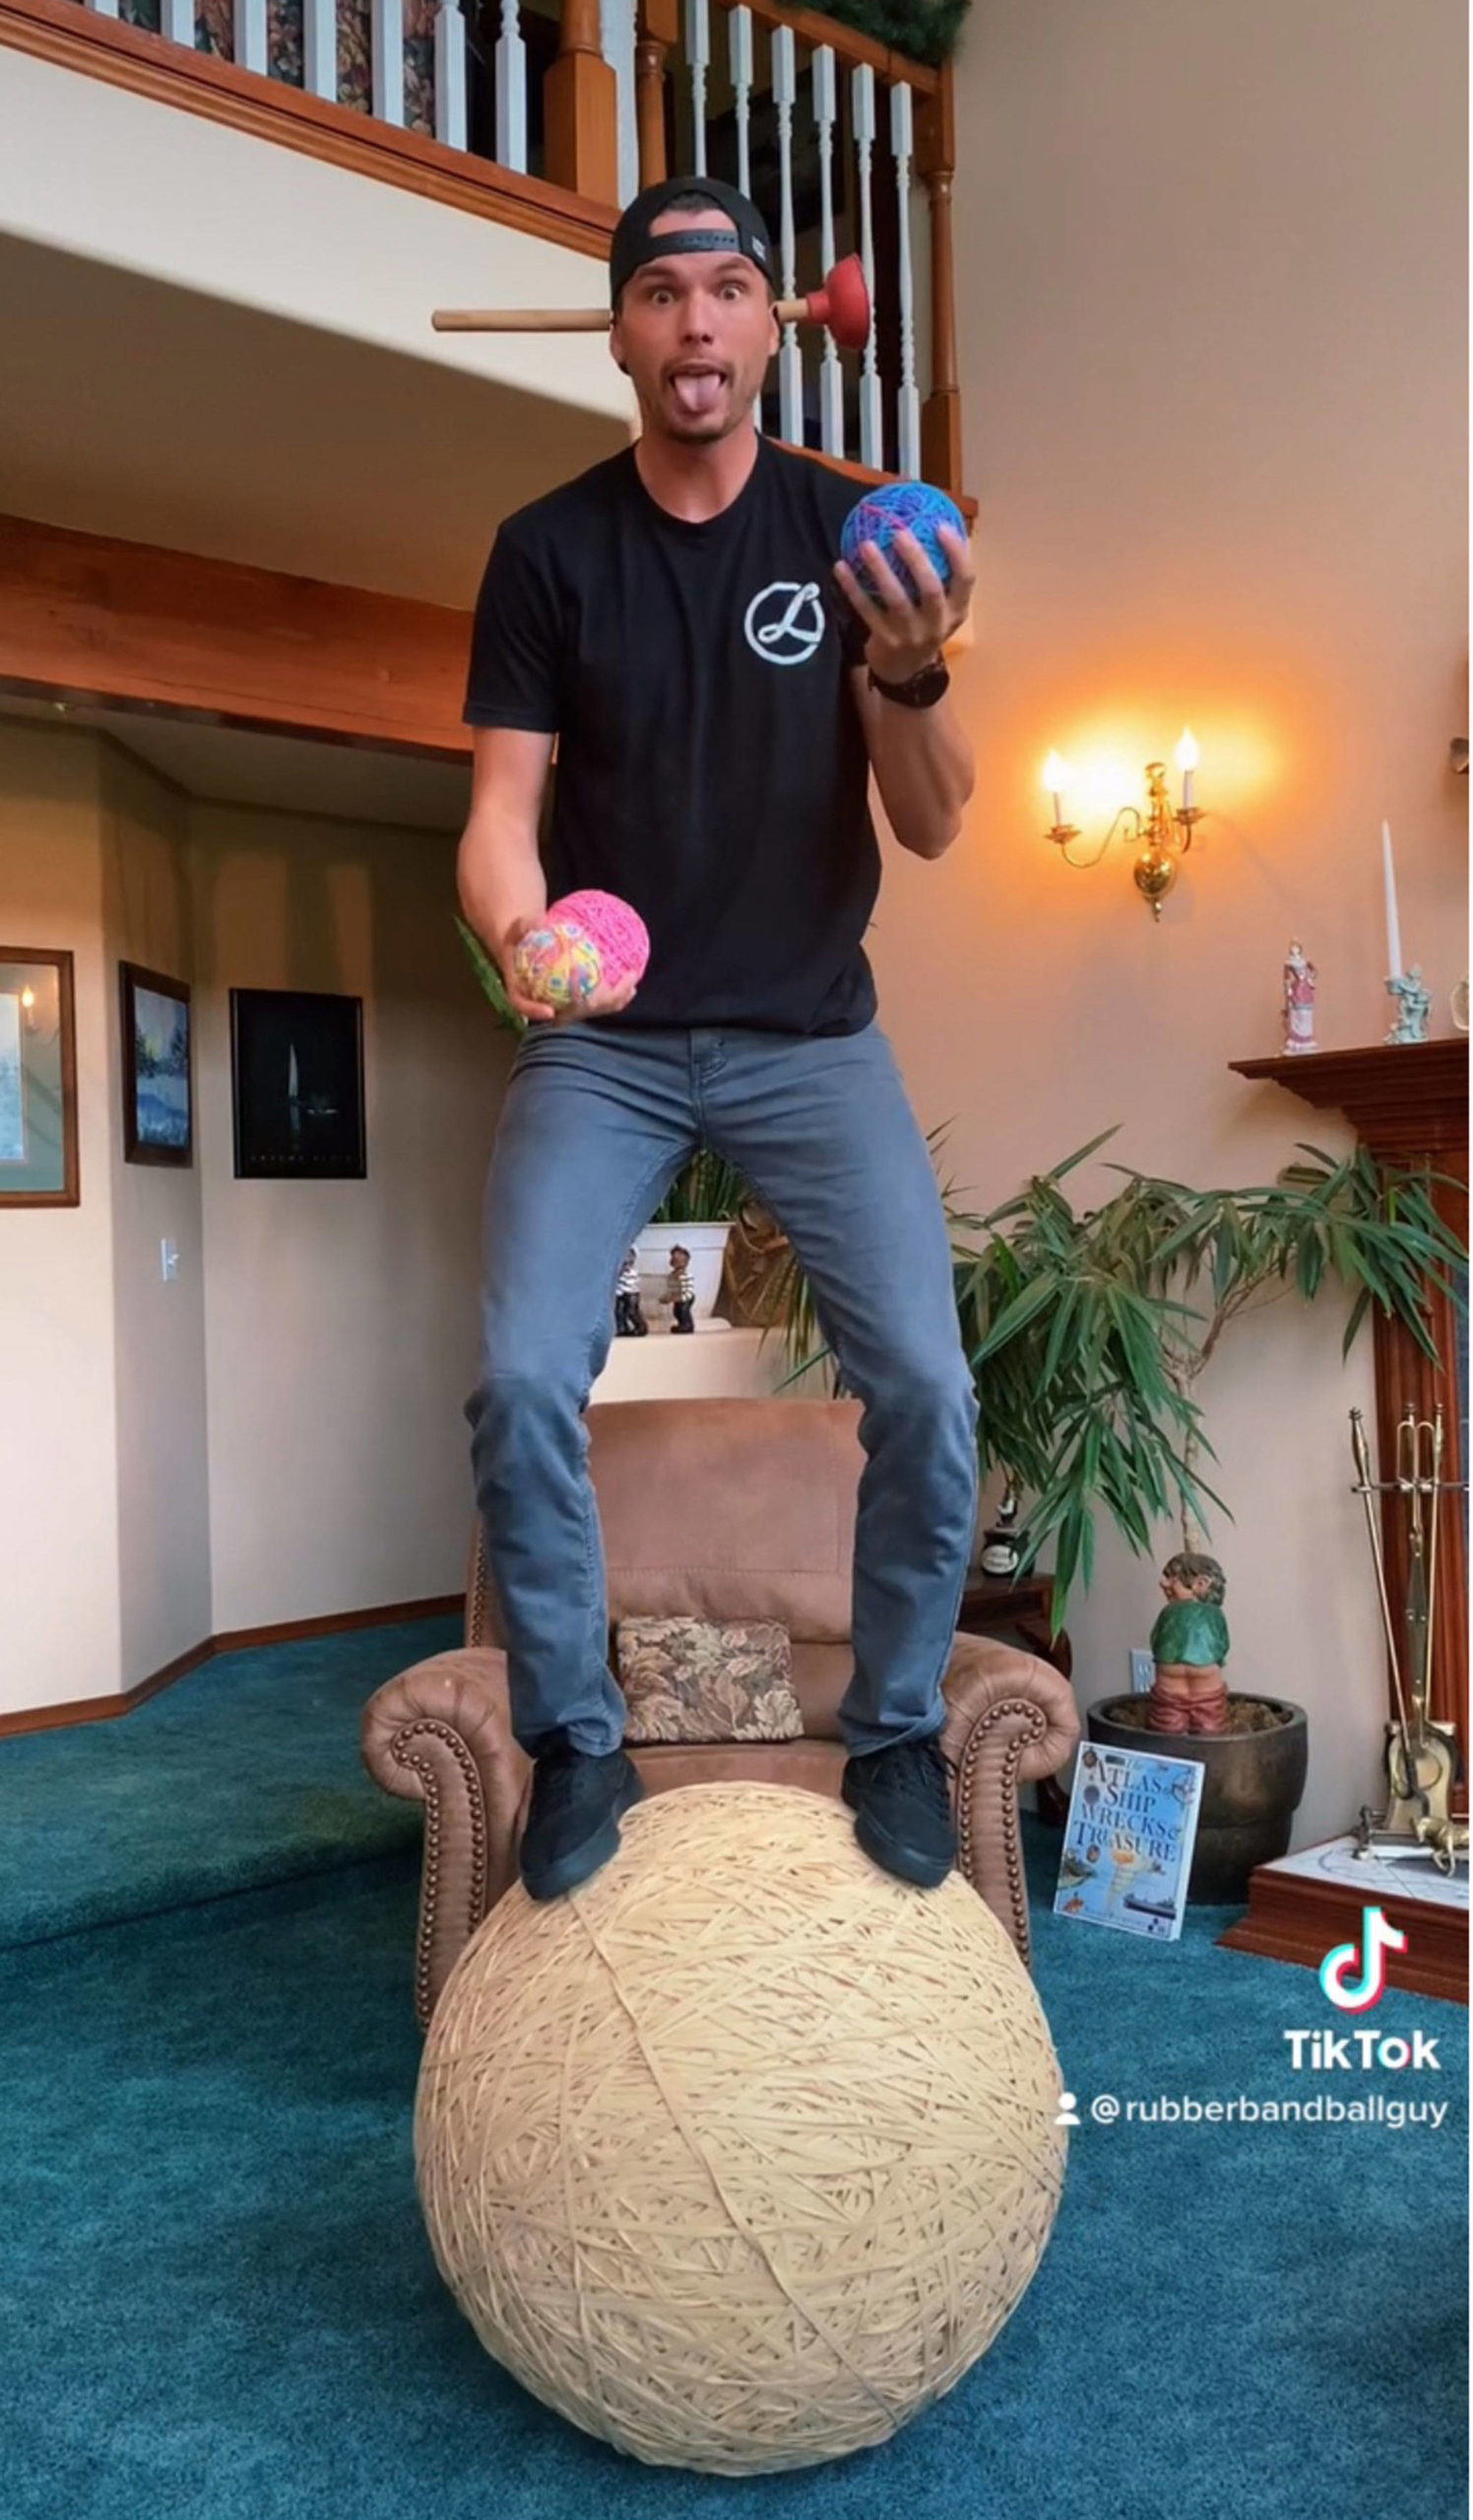 Going by the name Rubber Band Ball Guy on TikTok, Jayson Brocklesby has amassed more than five million likes on his videos as he inches towards making a 500 pound rubber band ball. Photo courtesy of Jayson Brocklesby